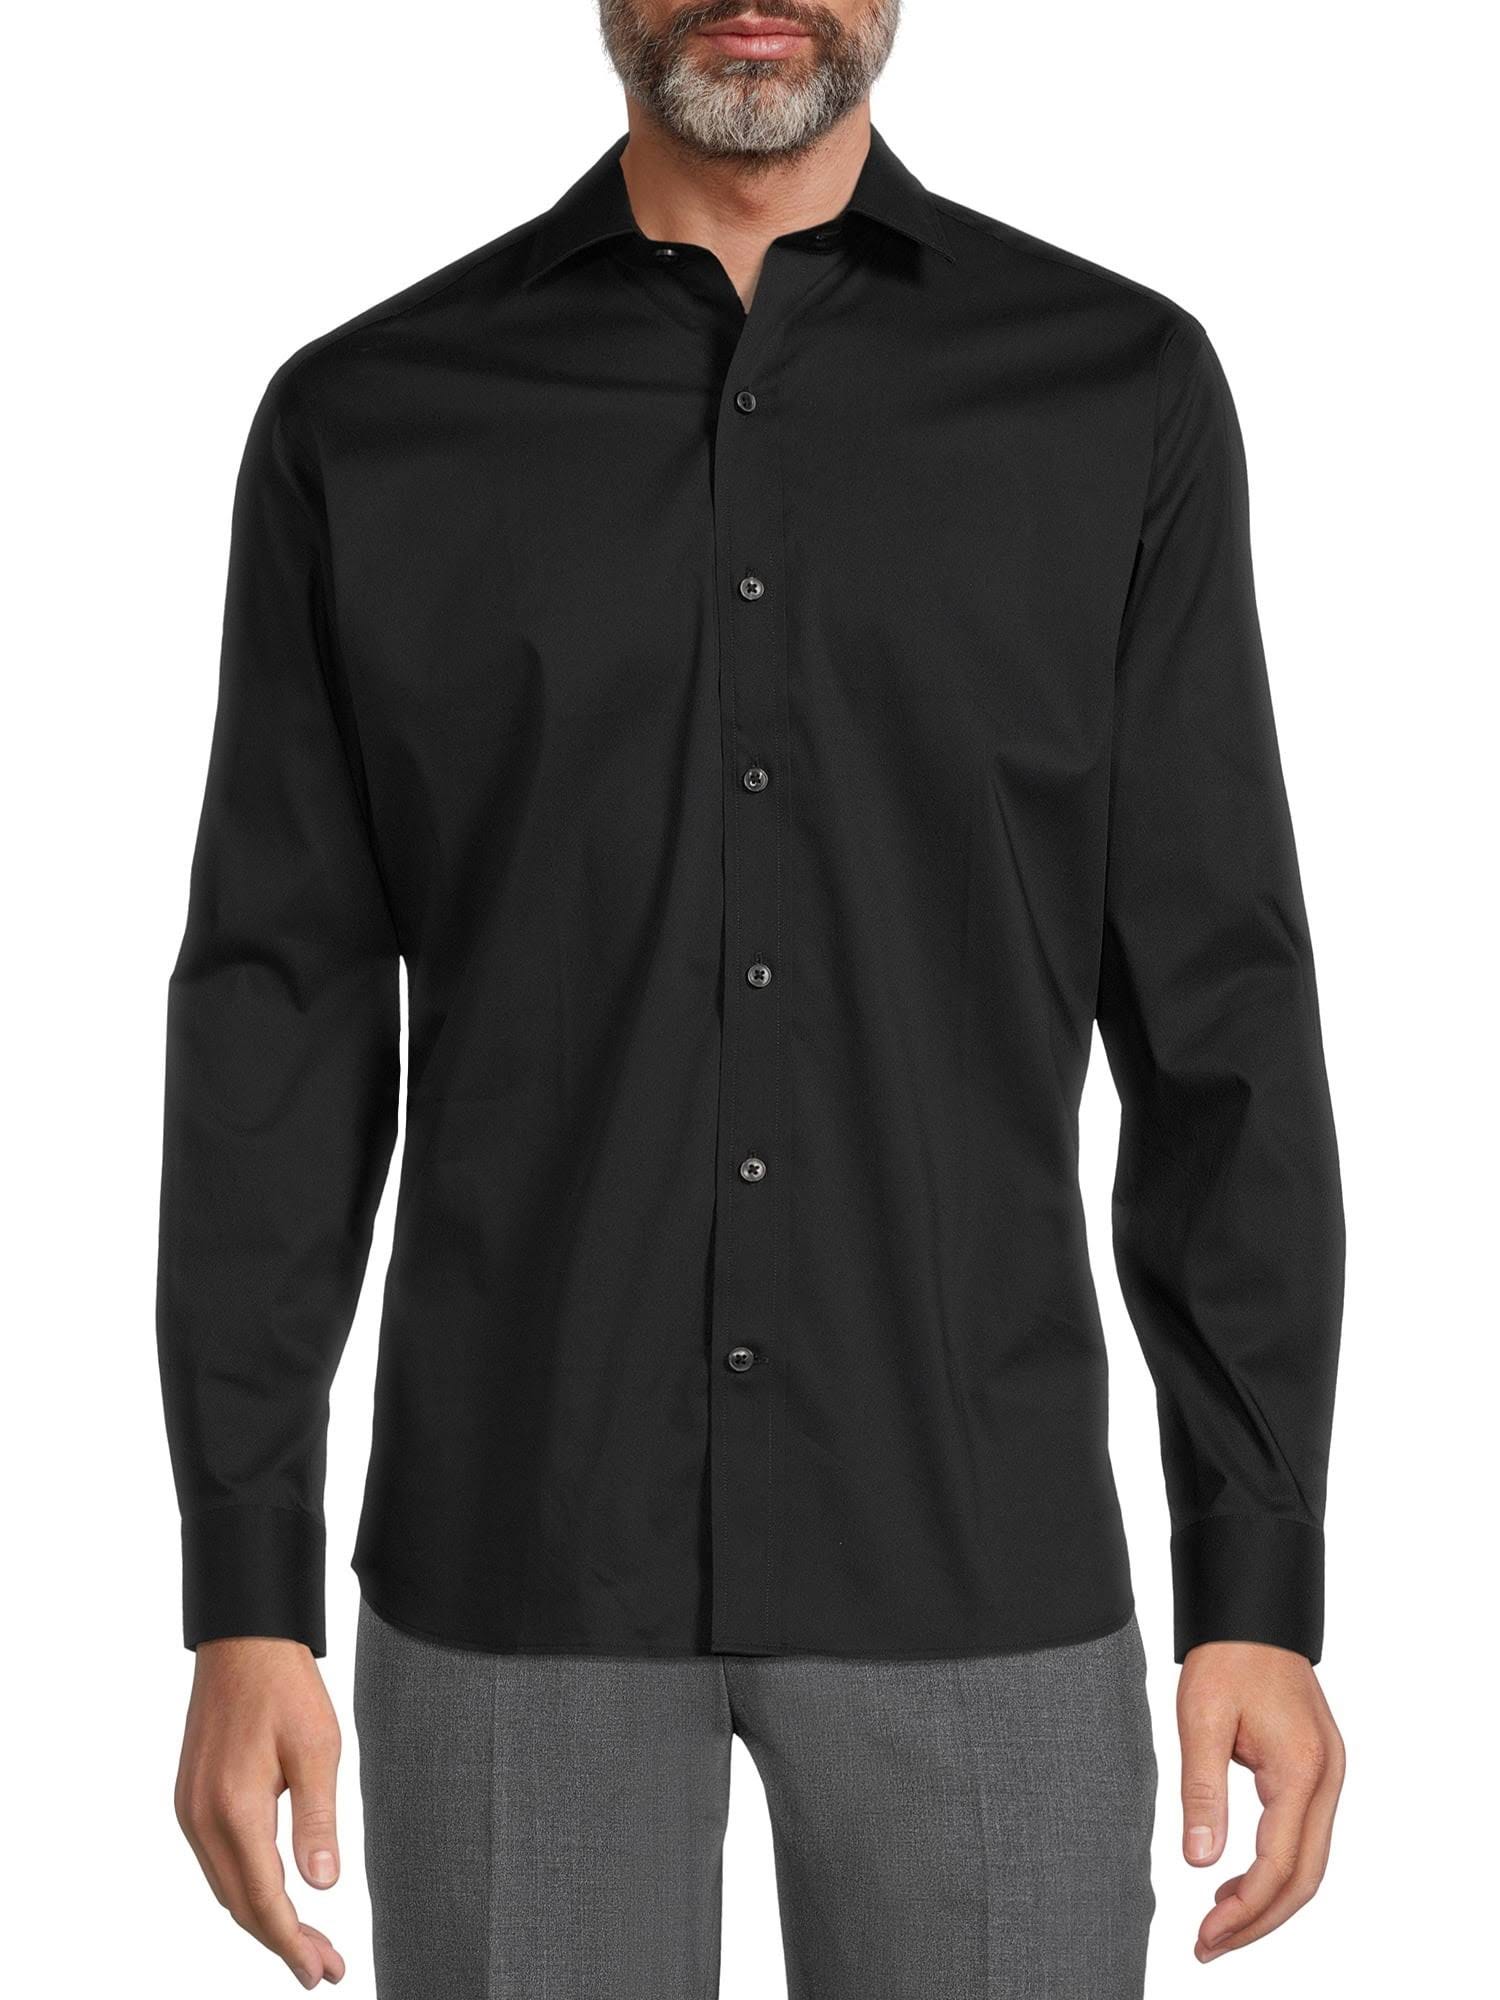 Polished Modern Fit Dress Shirt for Any Occasion | Image